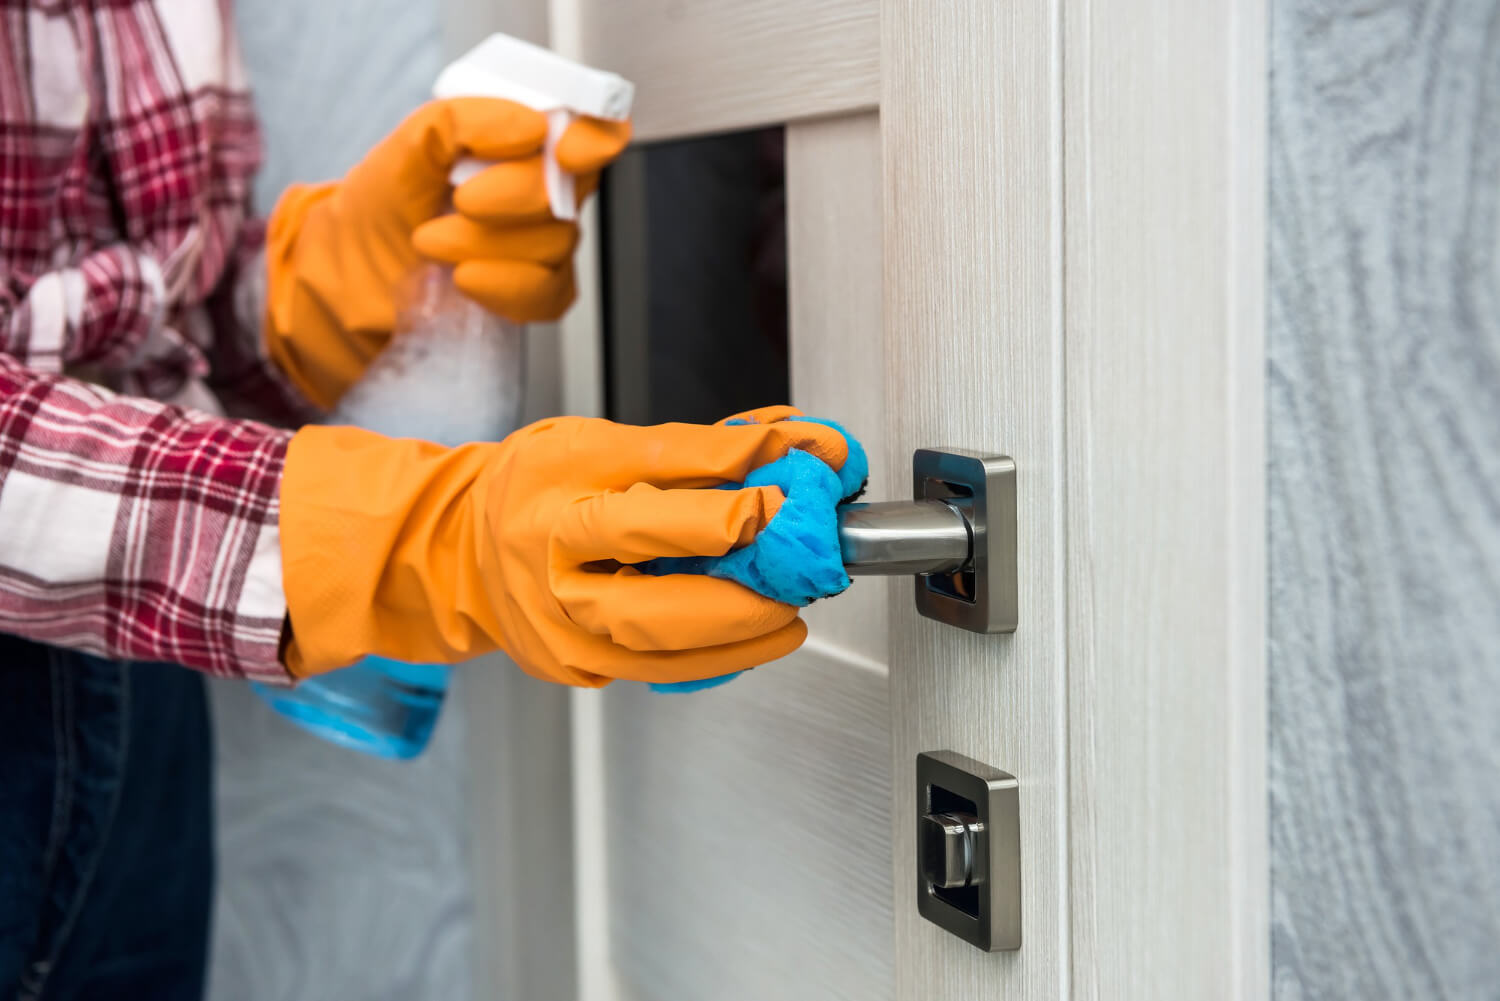 close up female hands in orange protective glove cleaning wooden door handle with blue cloth while holding cleaning spray